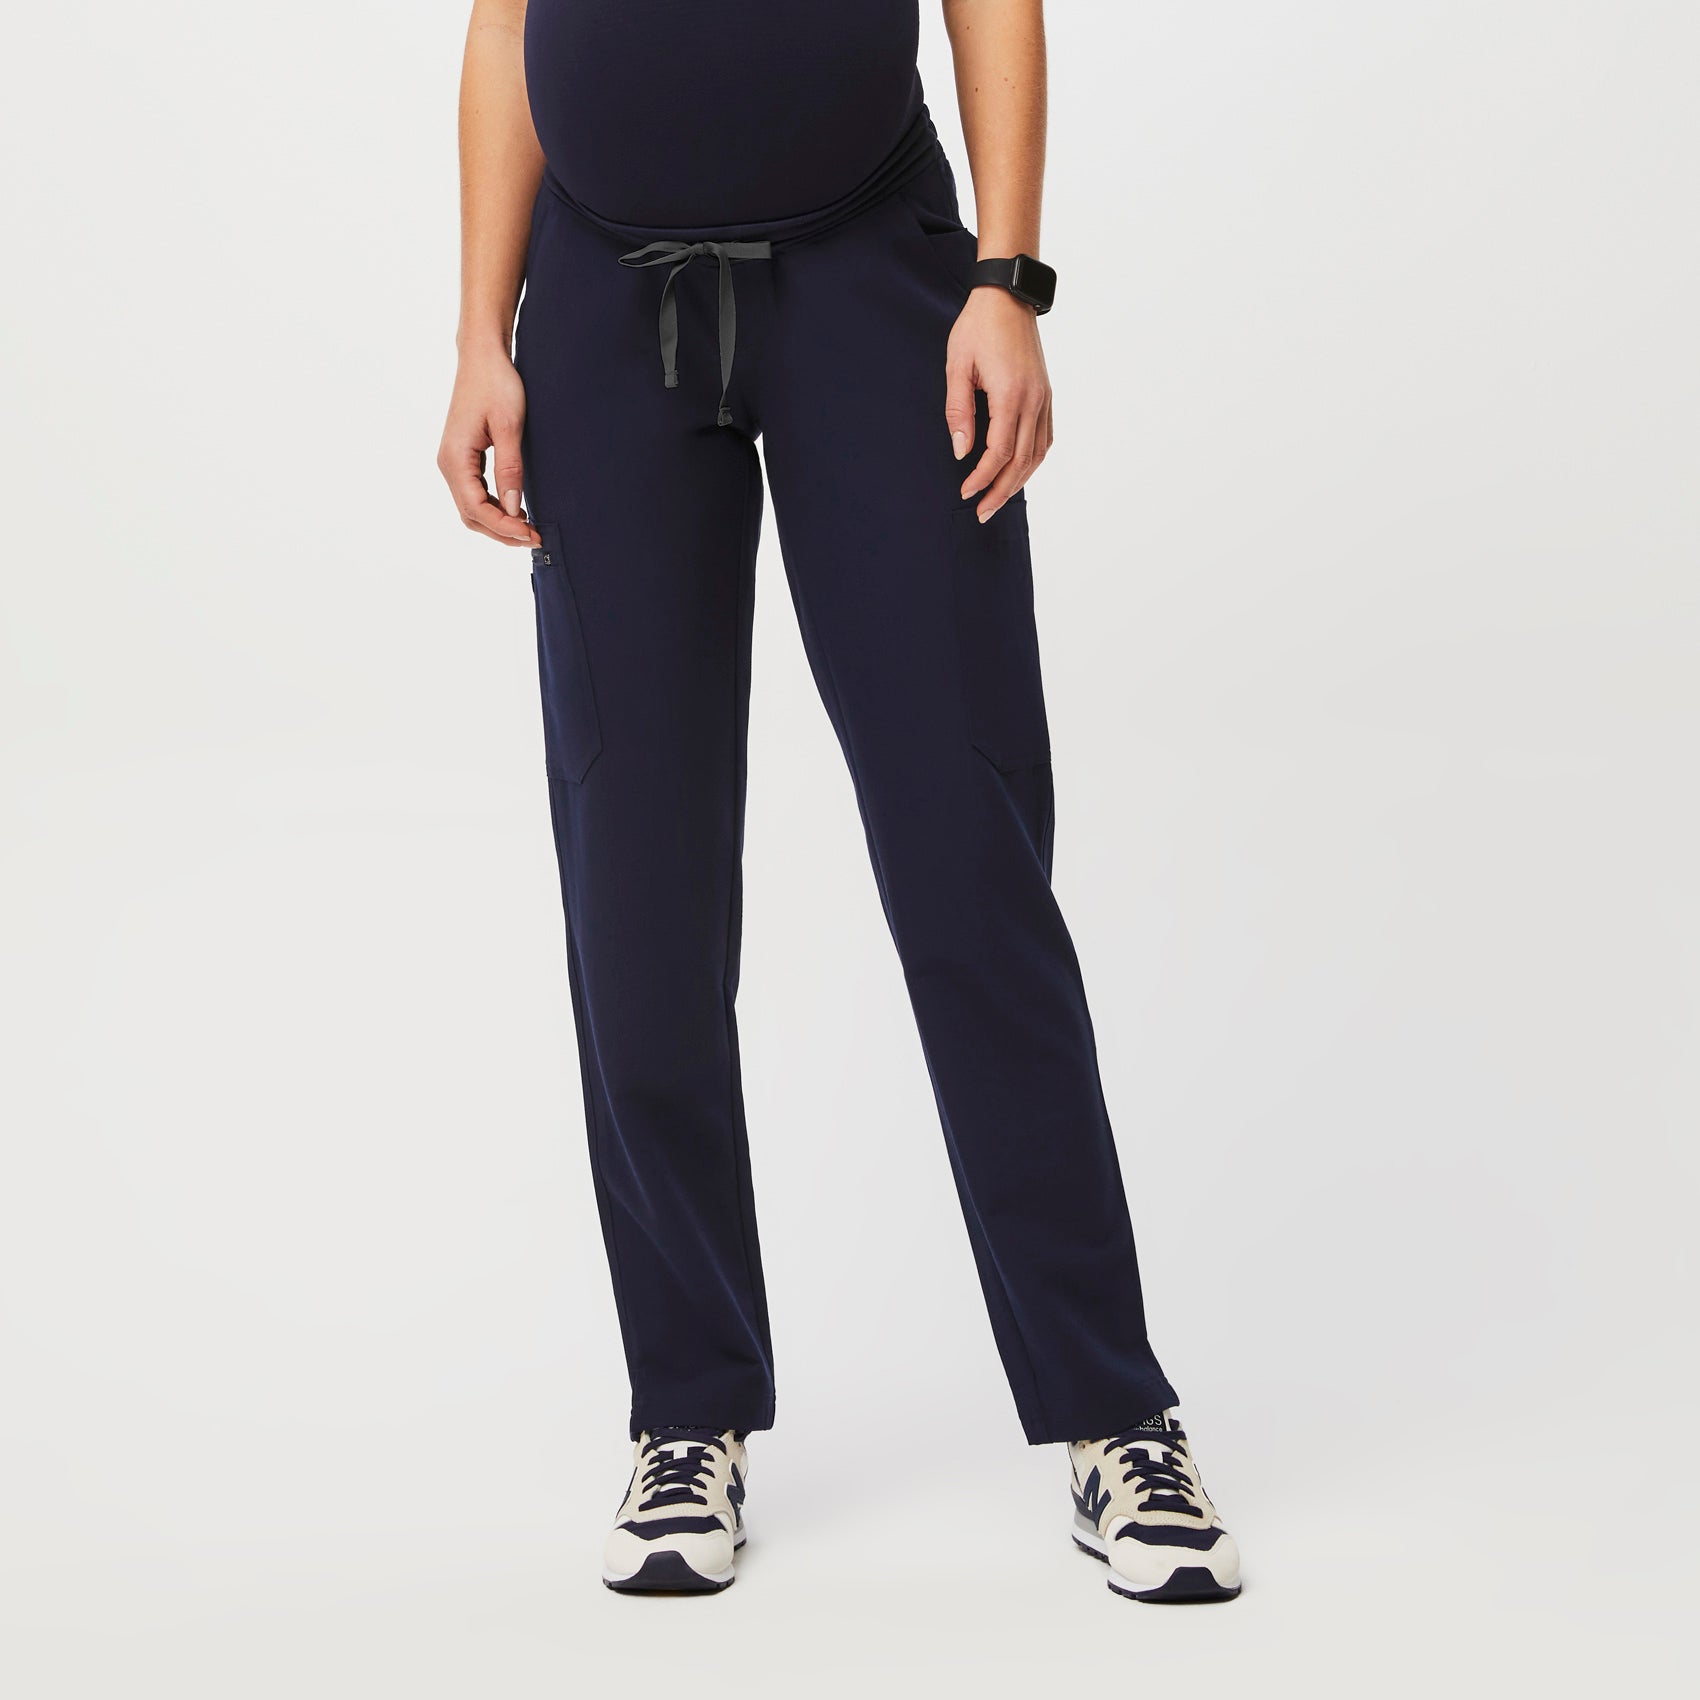 Portwest S234 Navy Stretch Maternity Trouser - Size: Small to 3XL